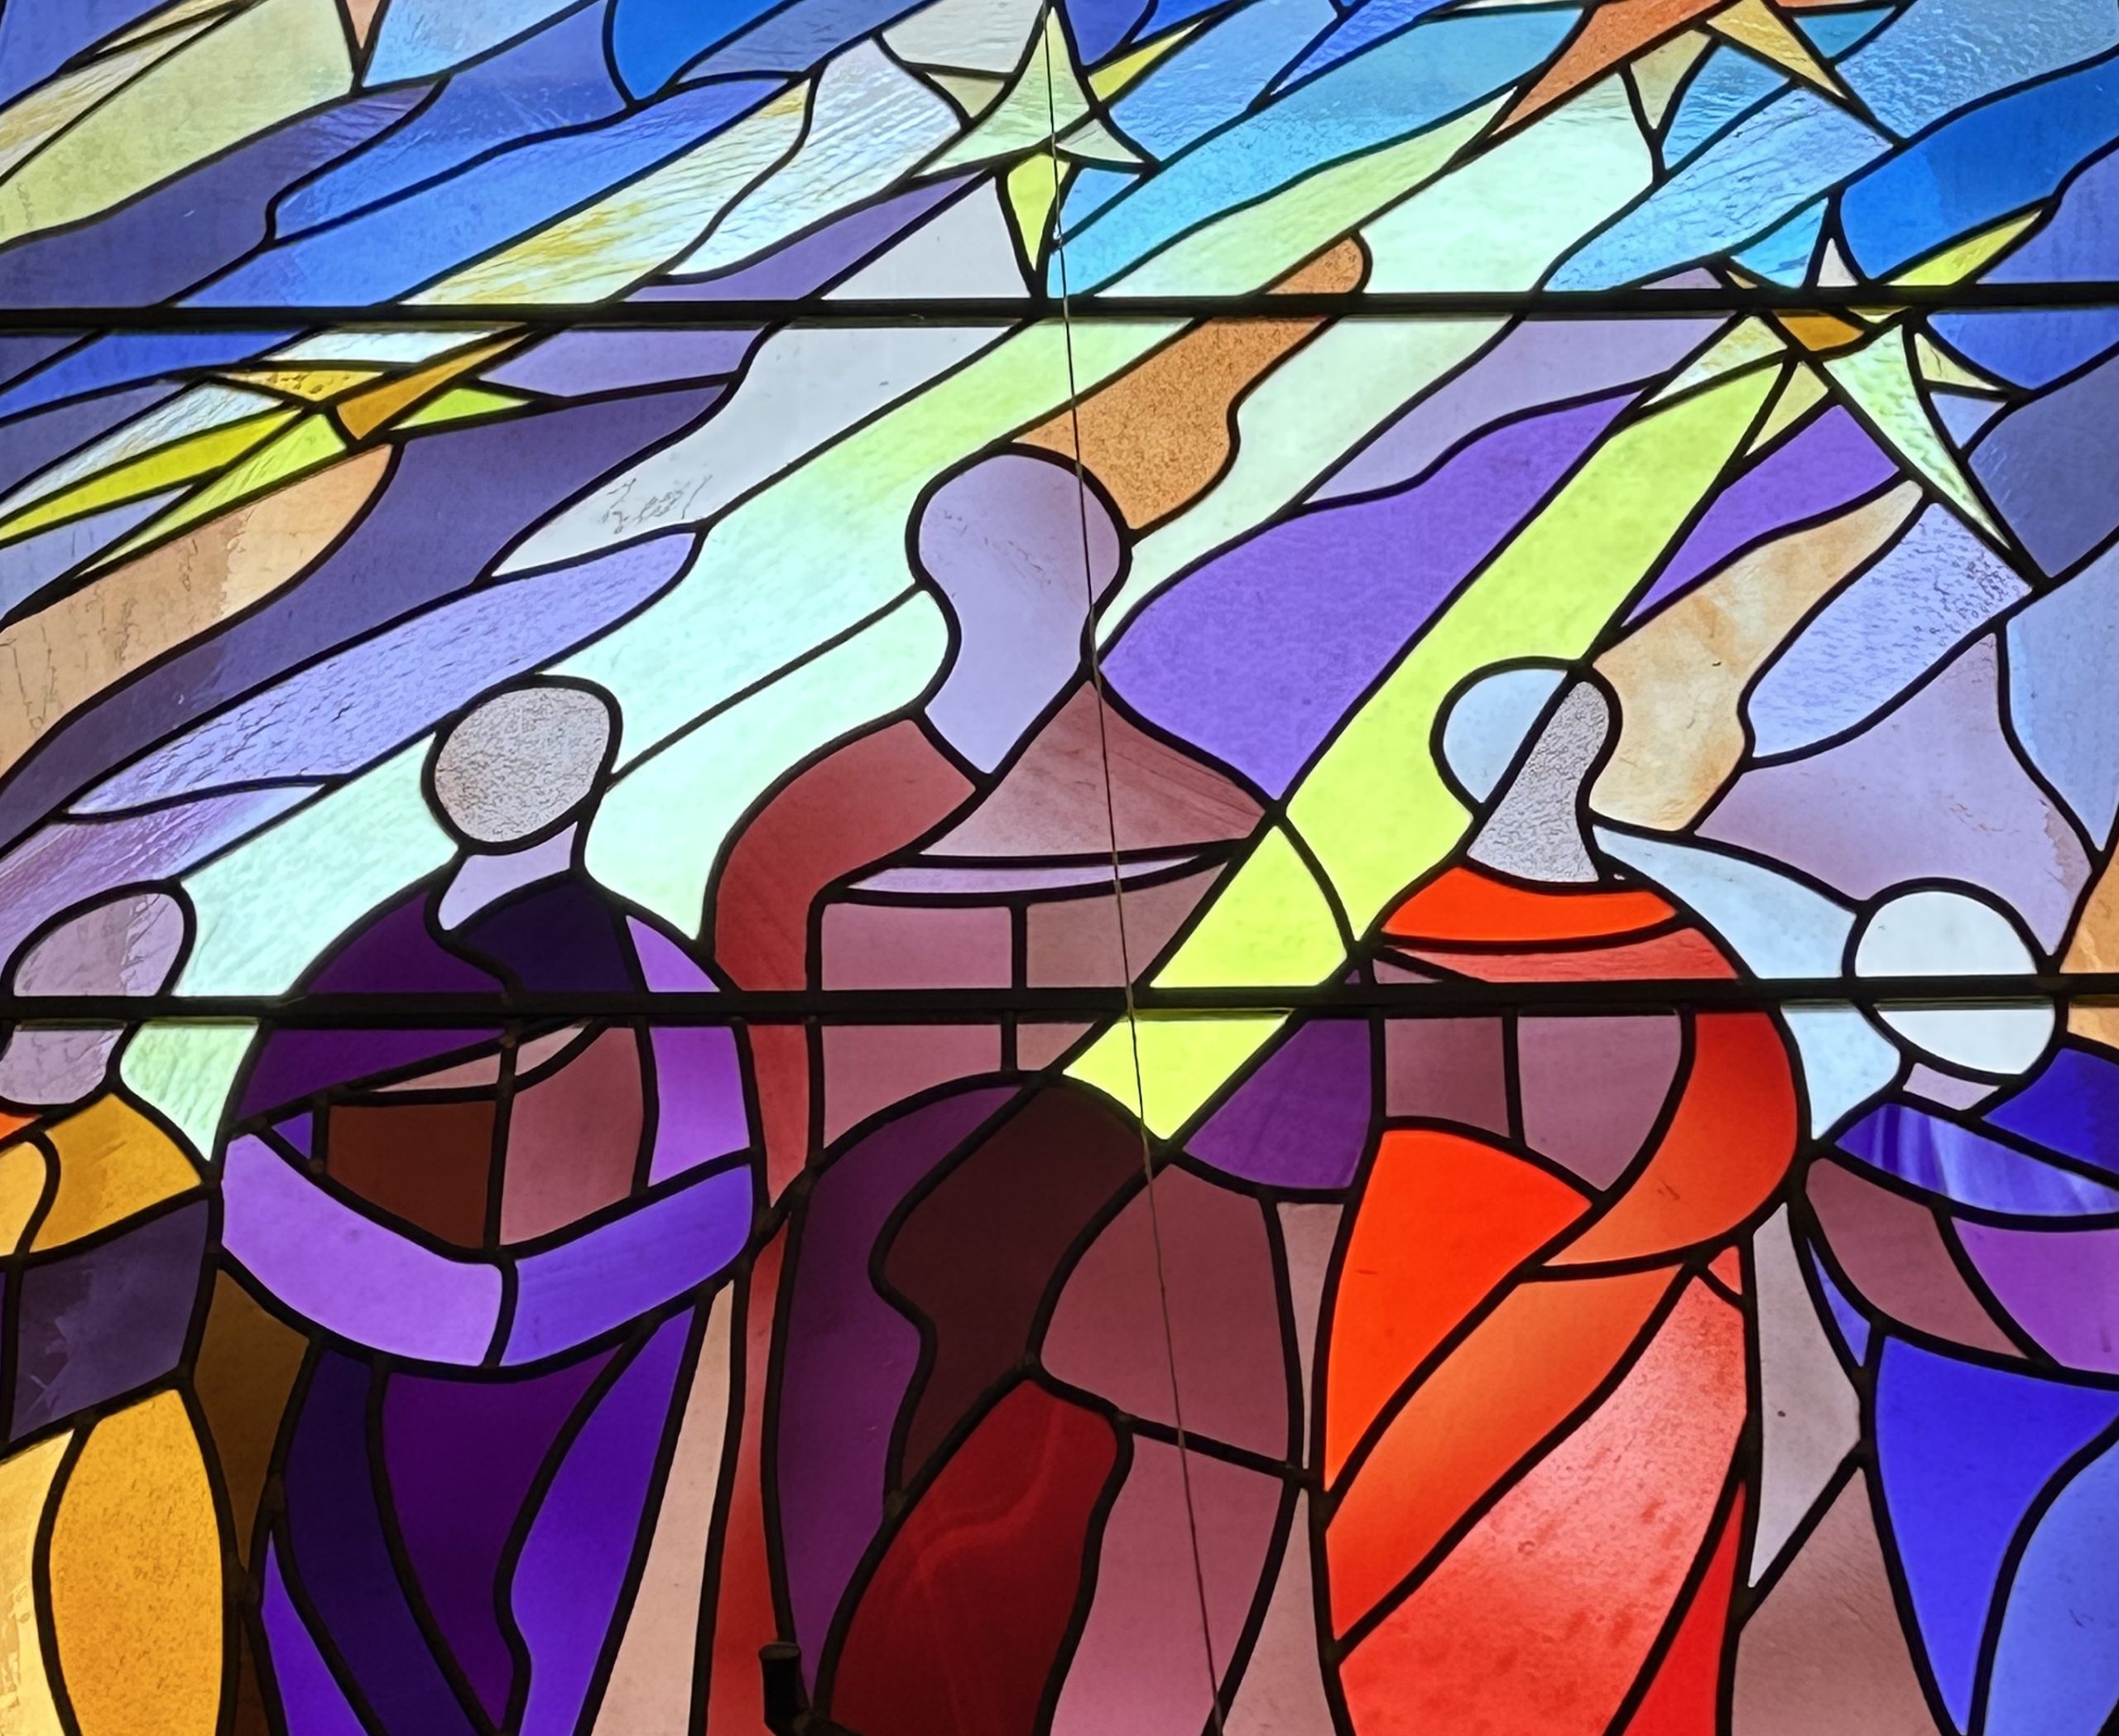 Stained glass window at Christ Church Uniting, Wayville. Five people dressed in yellow, purple, maroon, red, blue, with a purple and yellow background